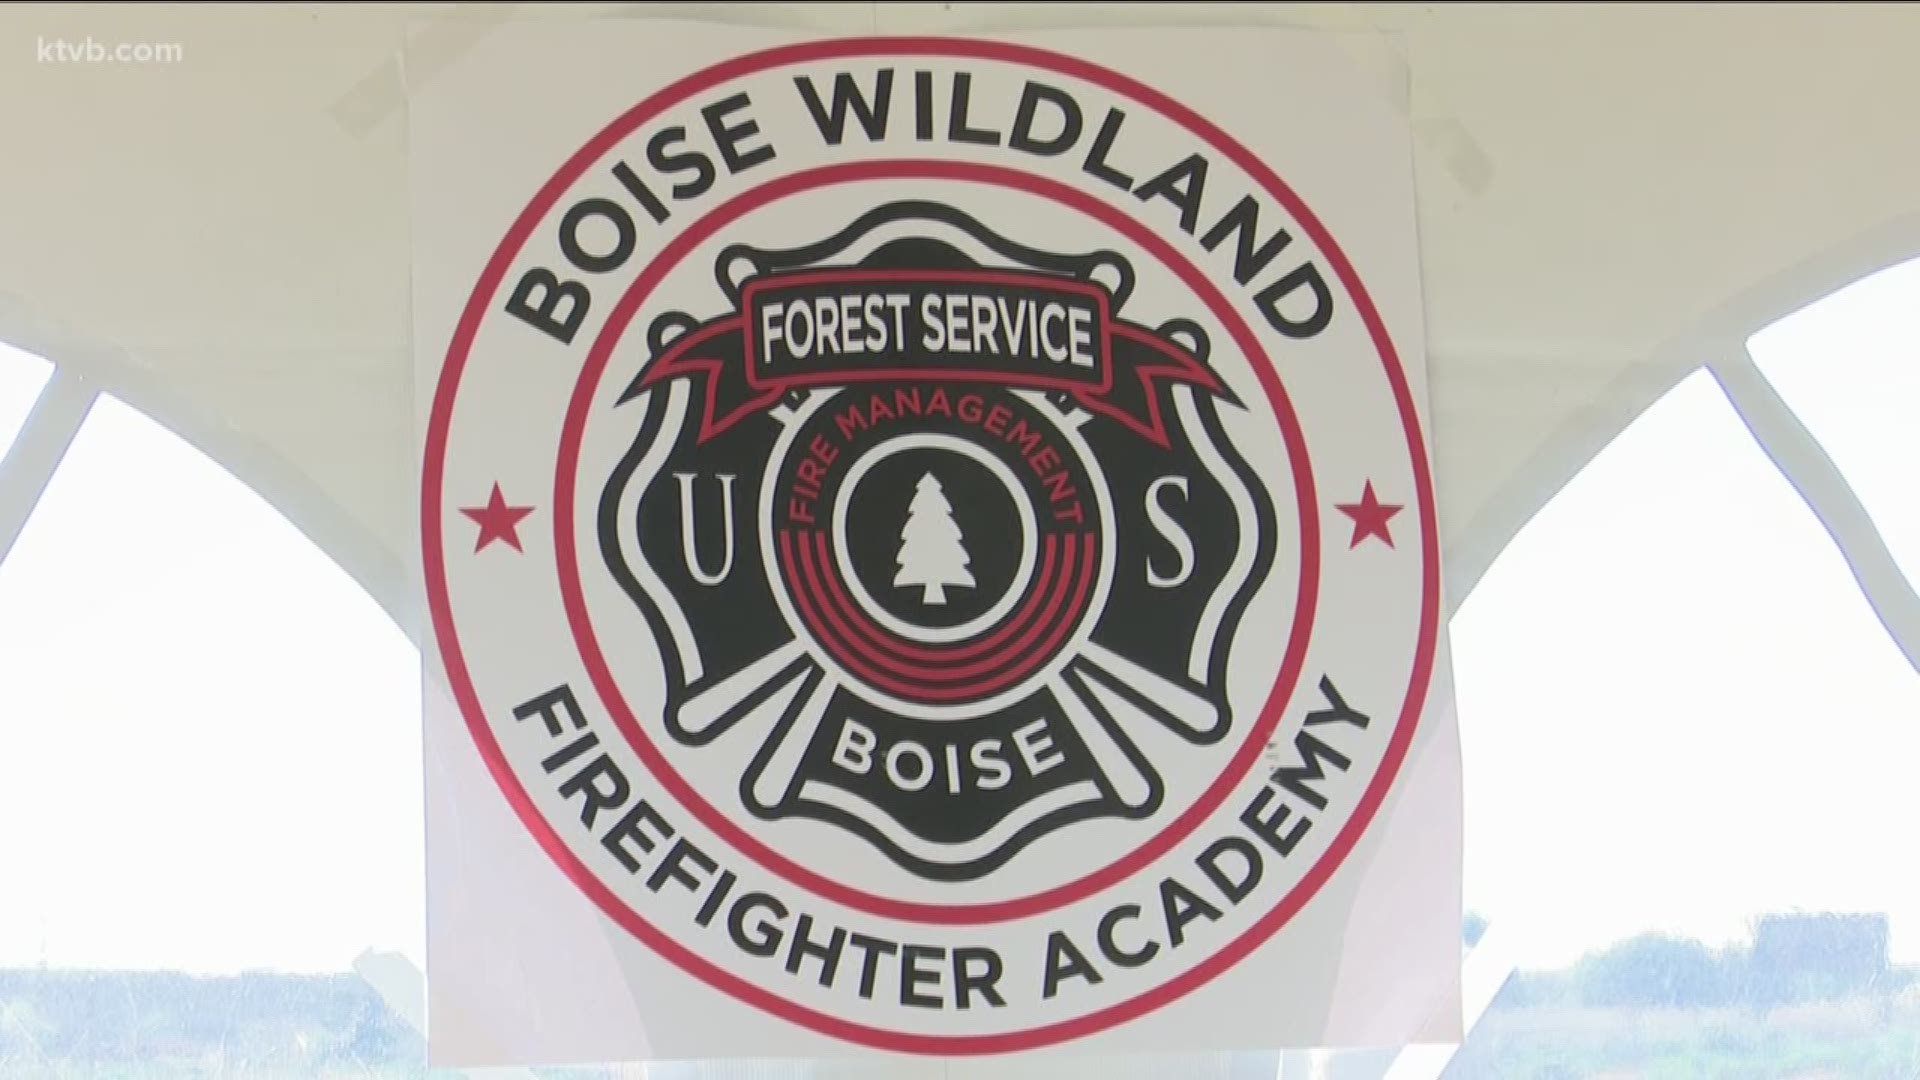 The academy provides classroom and field training for recruits who will battle wildfires in the future.